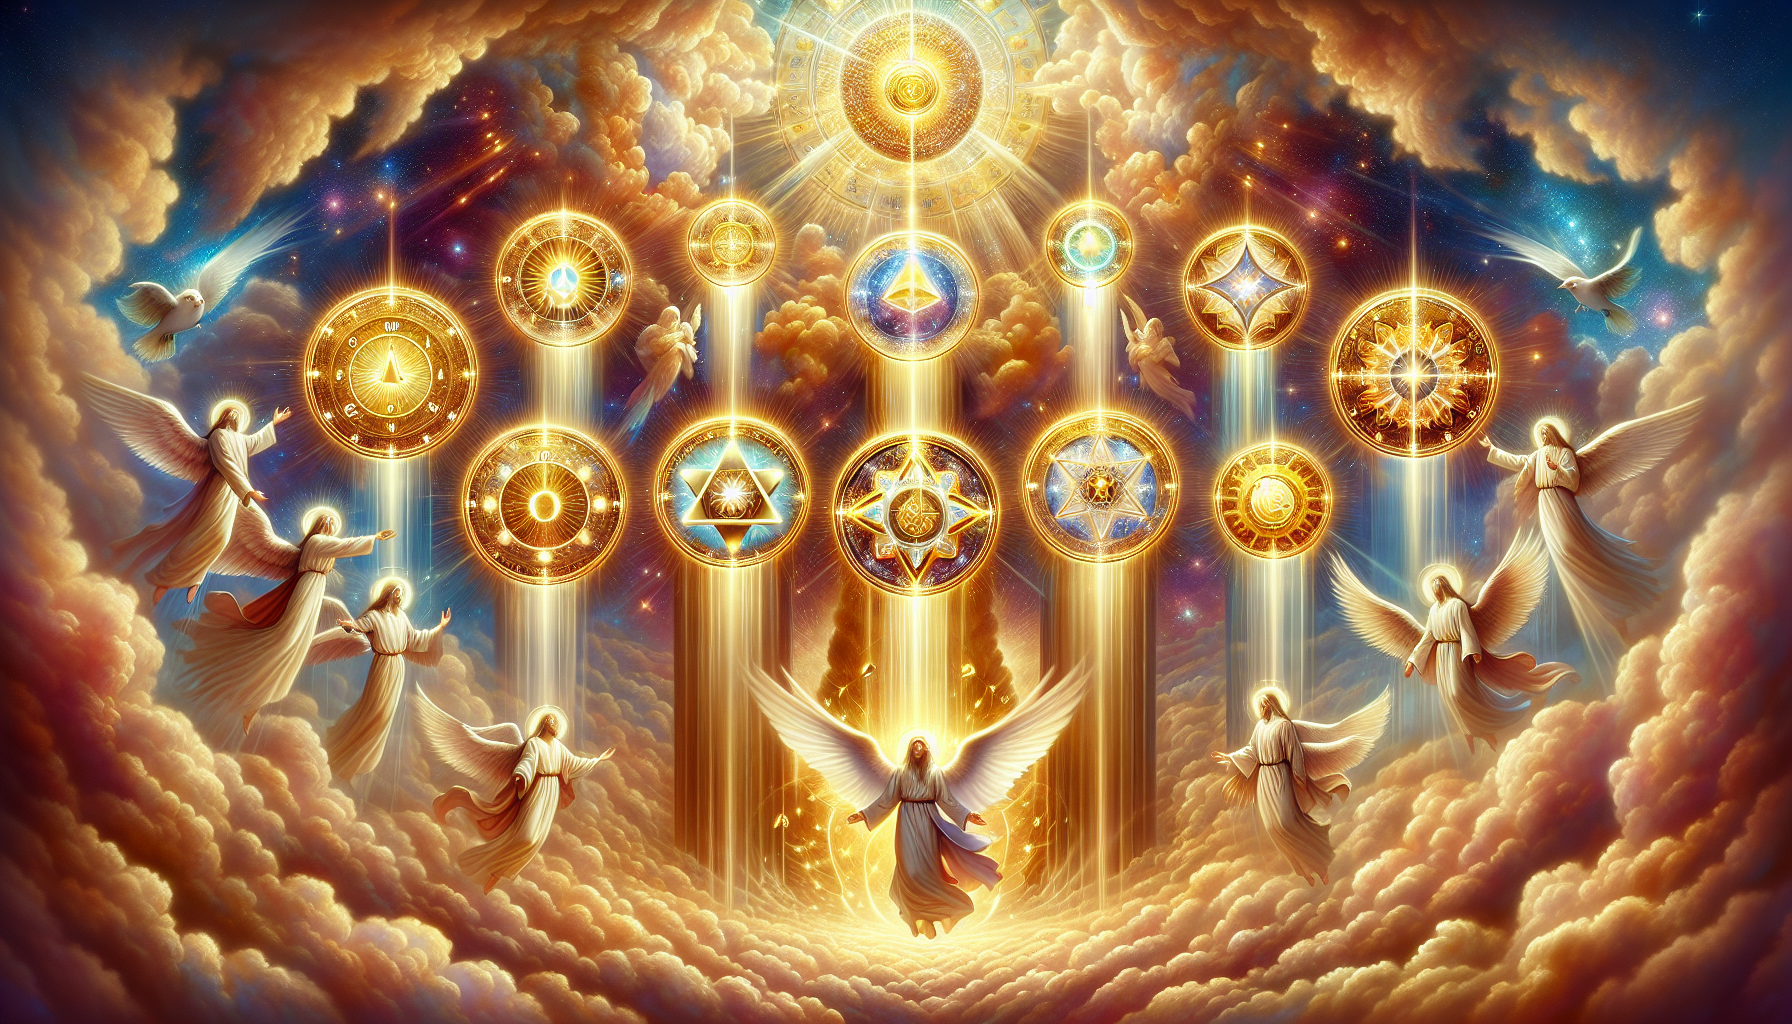 An ethereal, heavenly scene featuring radiant beams of light descending upon seven symbolic gifts, each representing one of the Gifts of the Holy Spirit: Wisdom, Understanding, Counsel, Fortitude, Kno